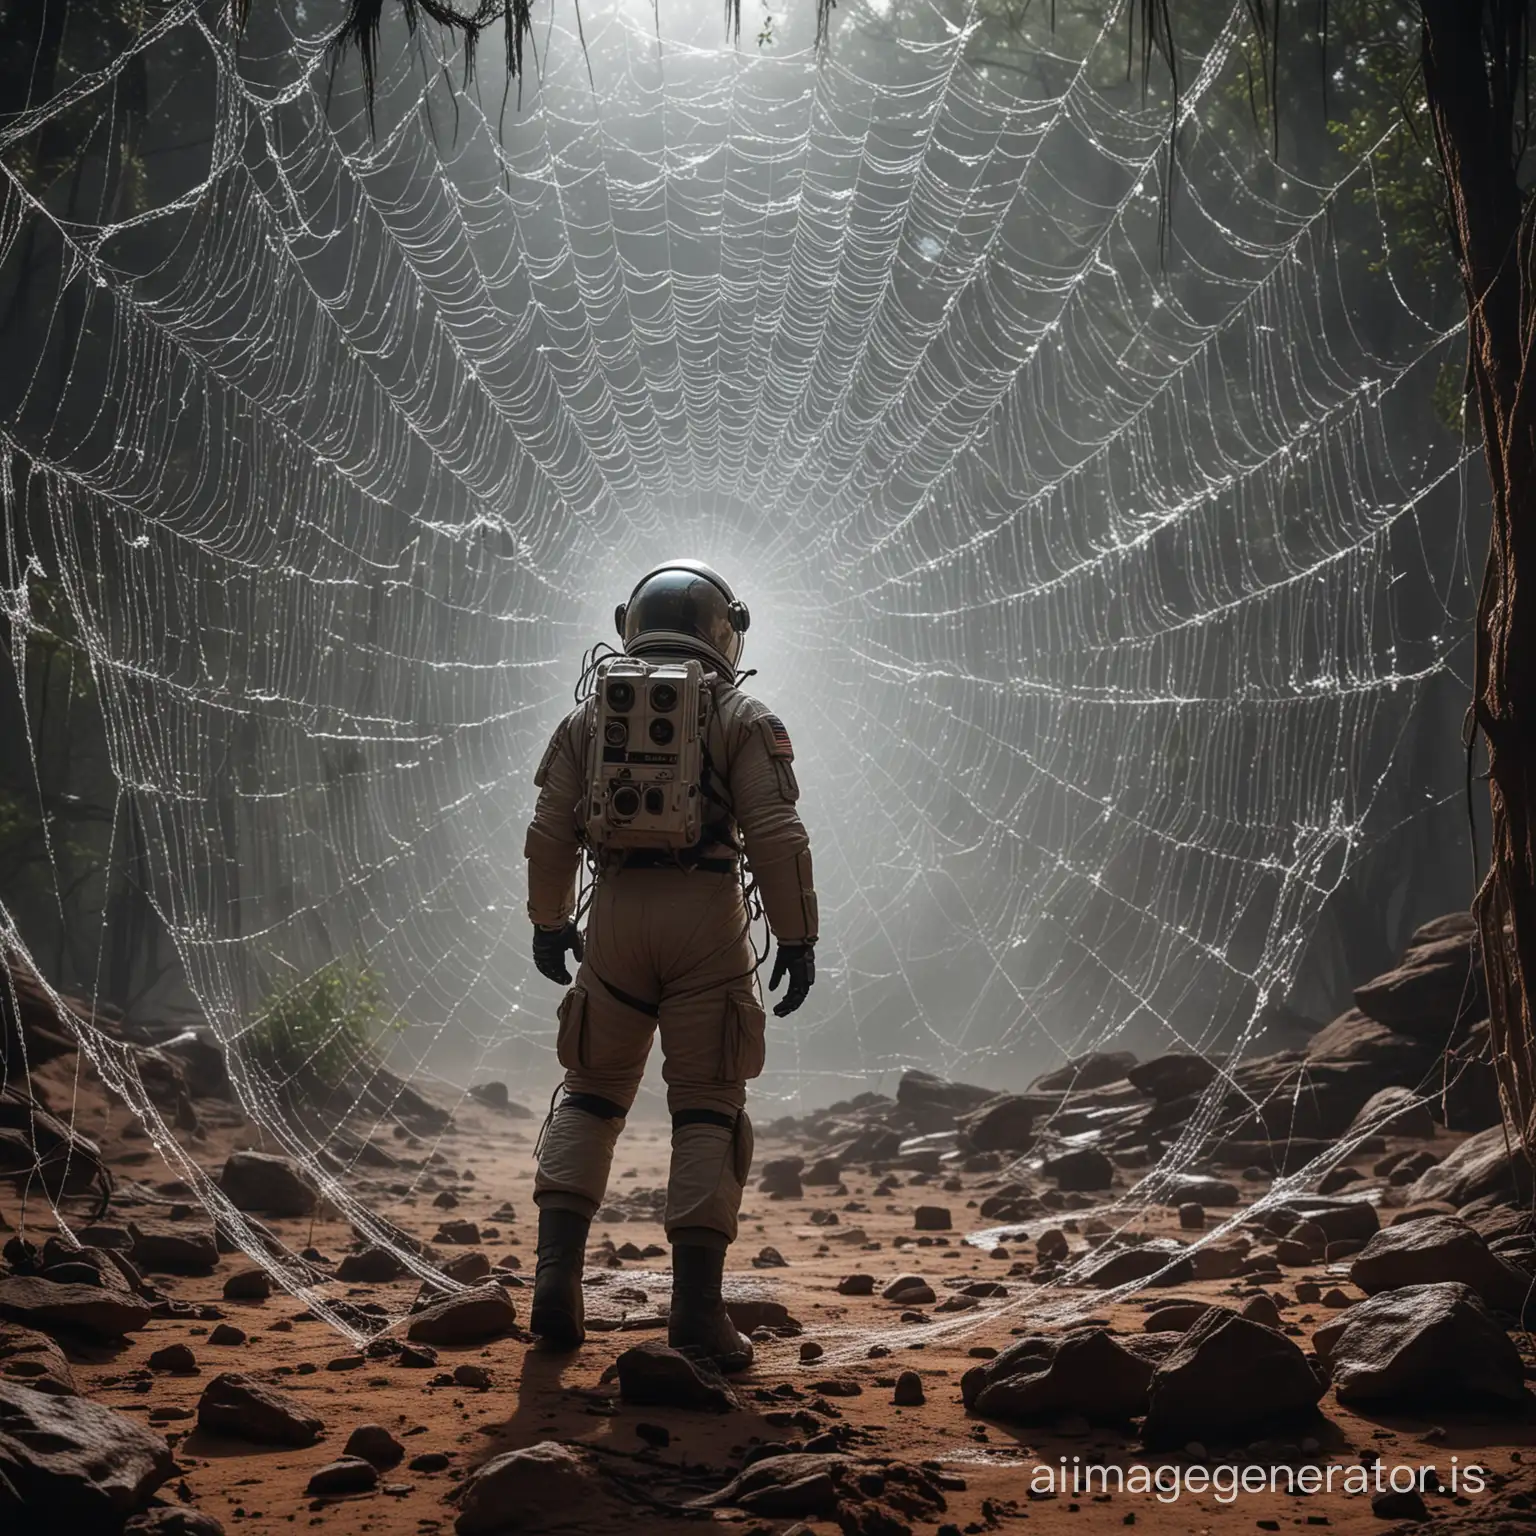 An astronaut trapped in a huge spider web on an unknown planet.